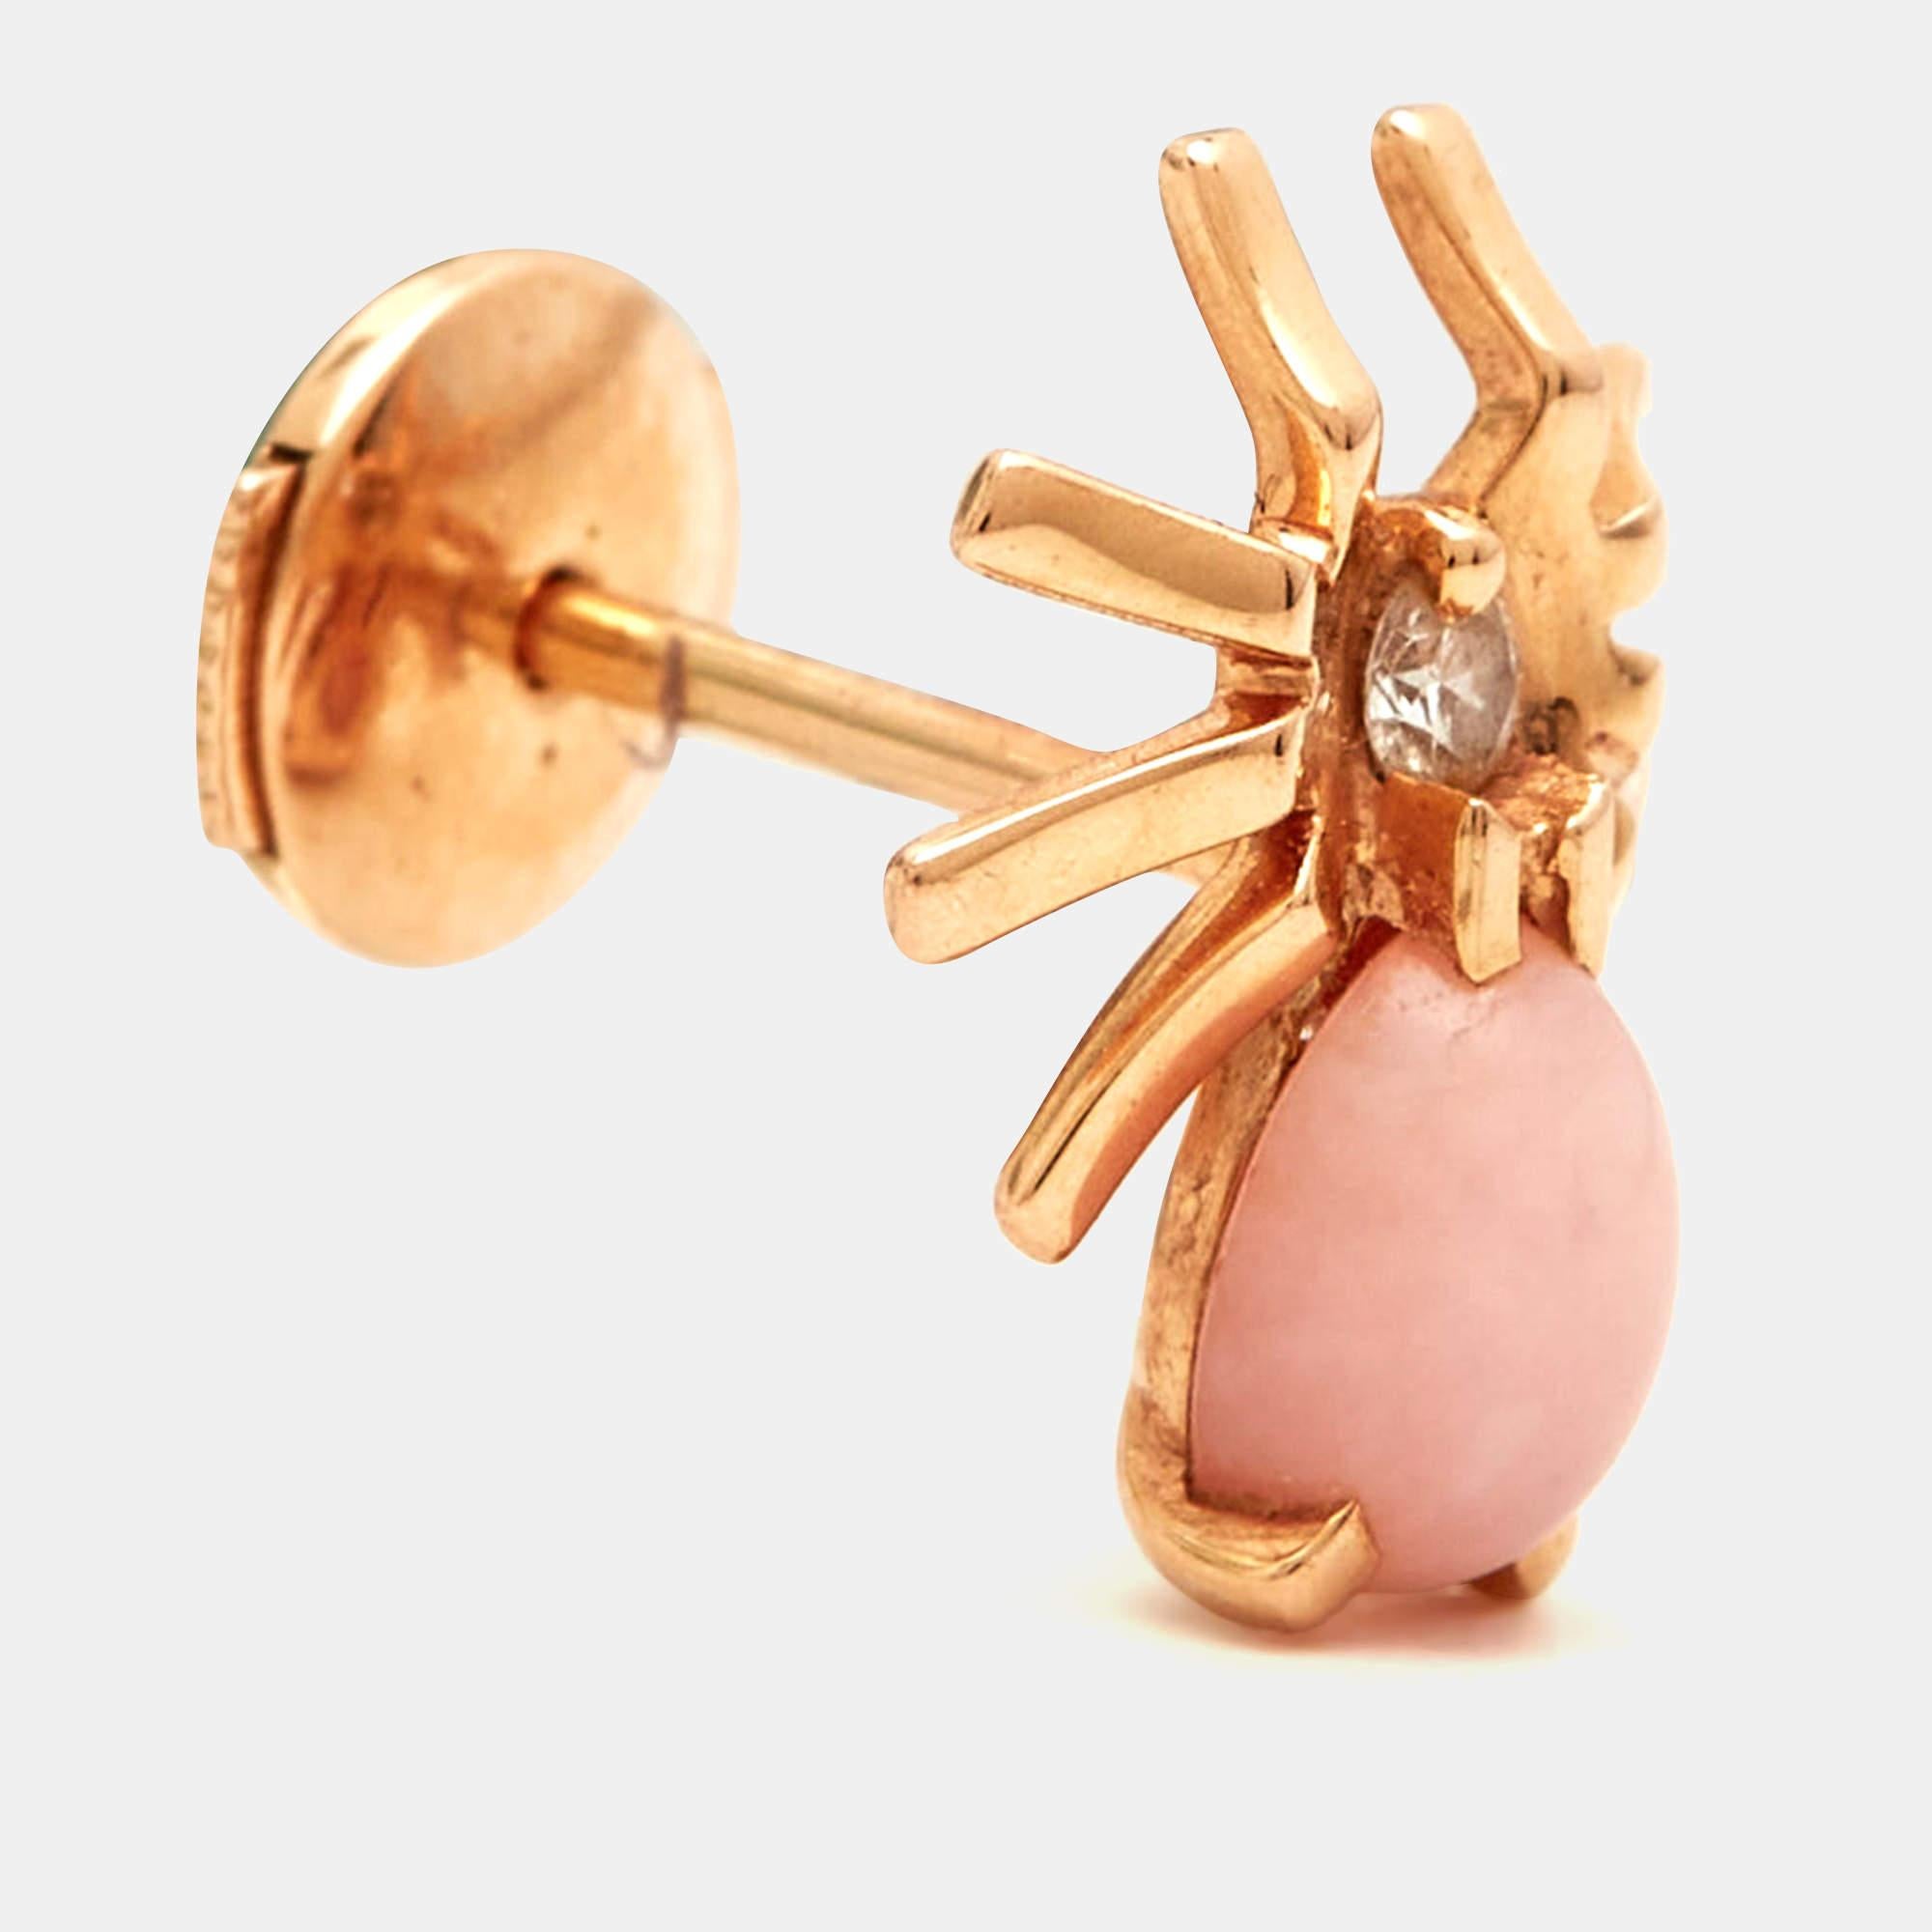 Chaumet's Attrape-moi stud earring is graceful and sophisticated. The spider-shaped carving is styled with opal gemstone and a diamond as the face. The 18K rose gold earring comes with a screw-back closure and is a hassle-free style making it easy